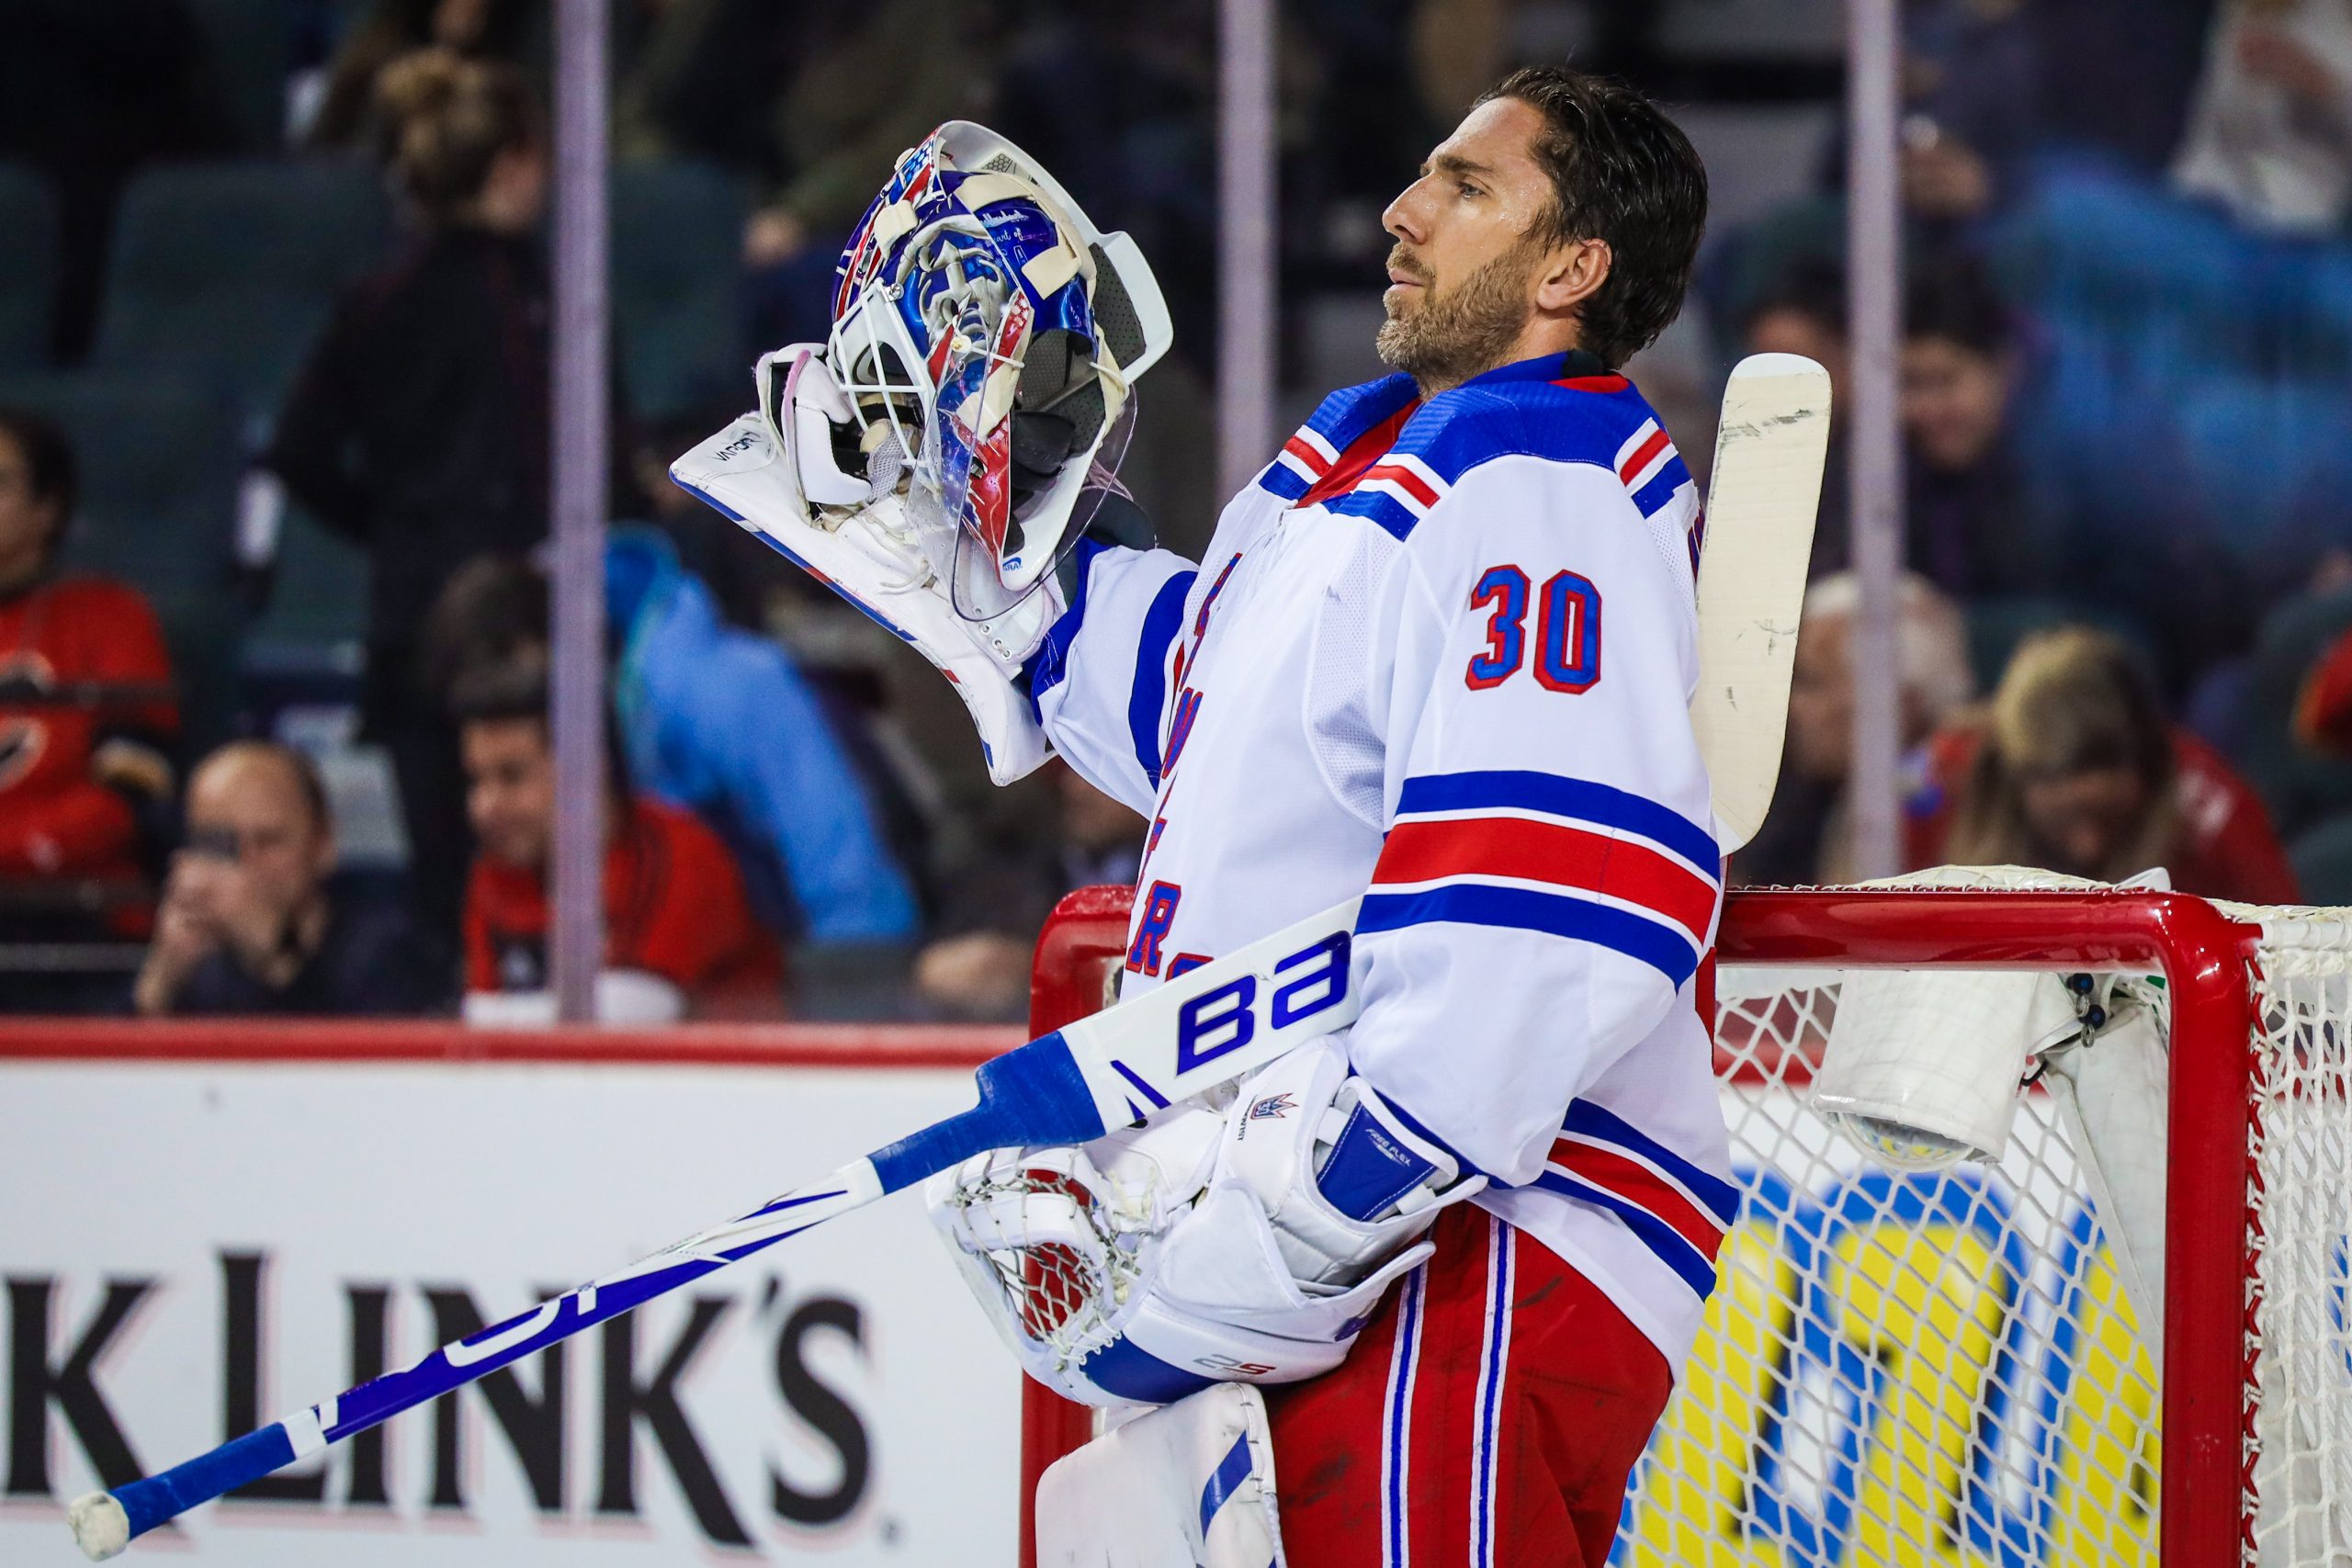 NY Rangers goalie Henrik Lundqvist: 'You just need to be patient